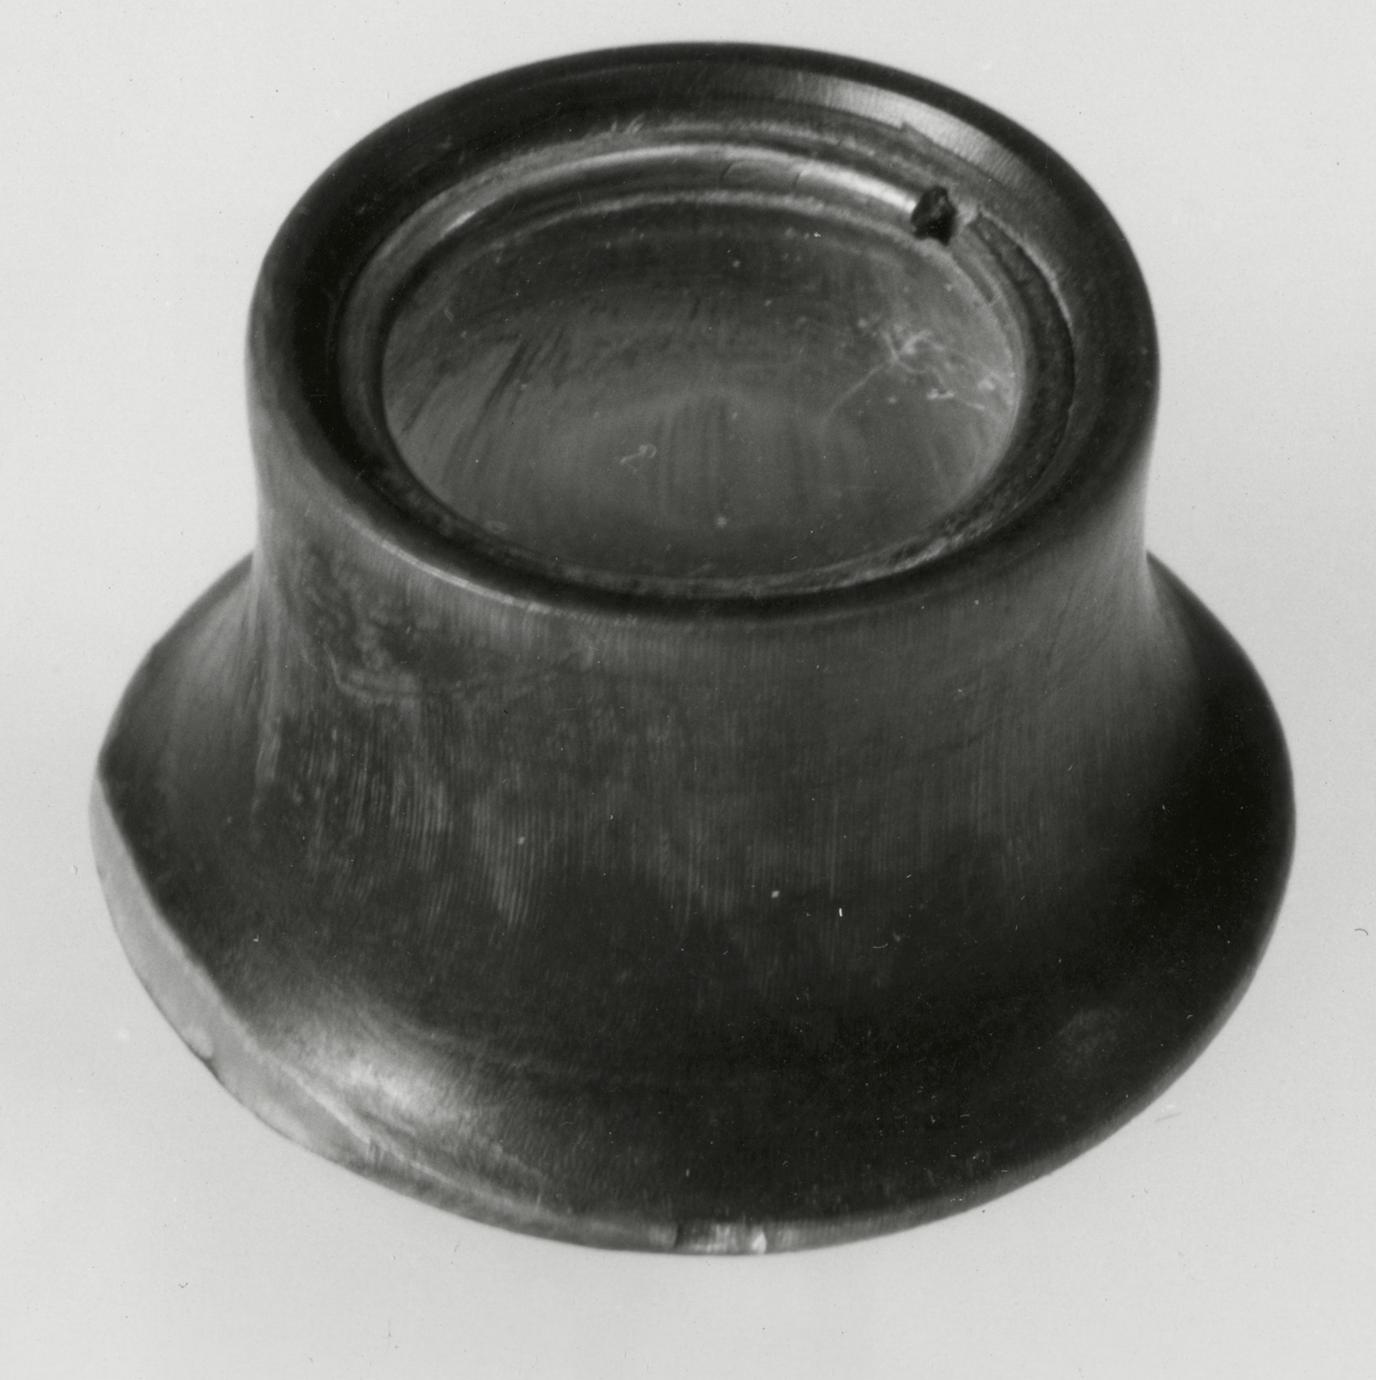 Black and white photograph of an eye glass (jeweler's loop).